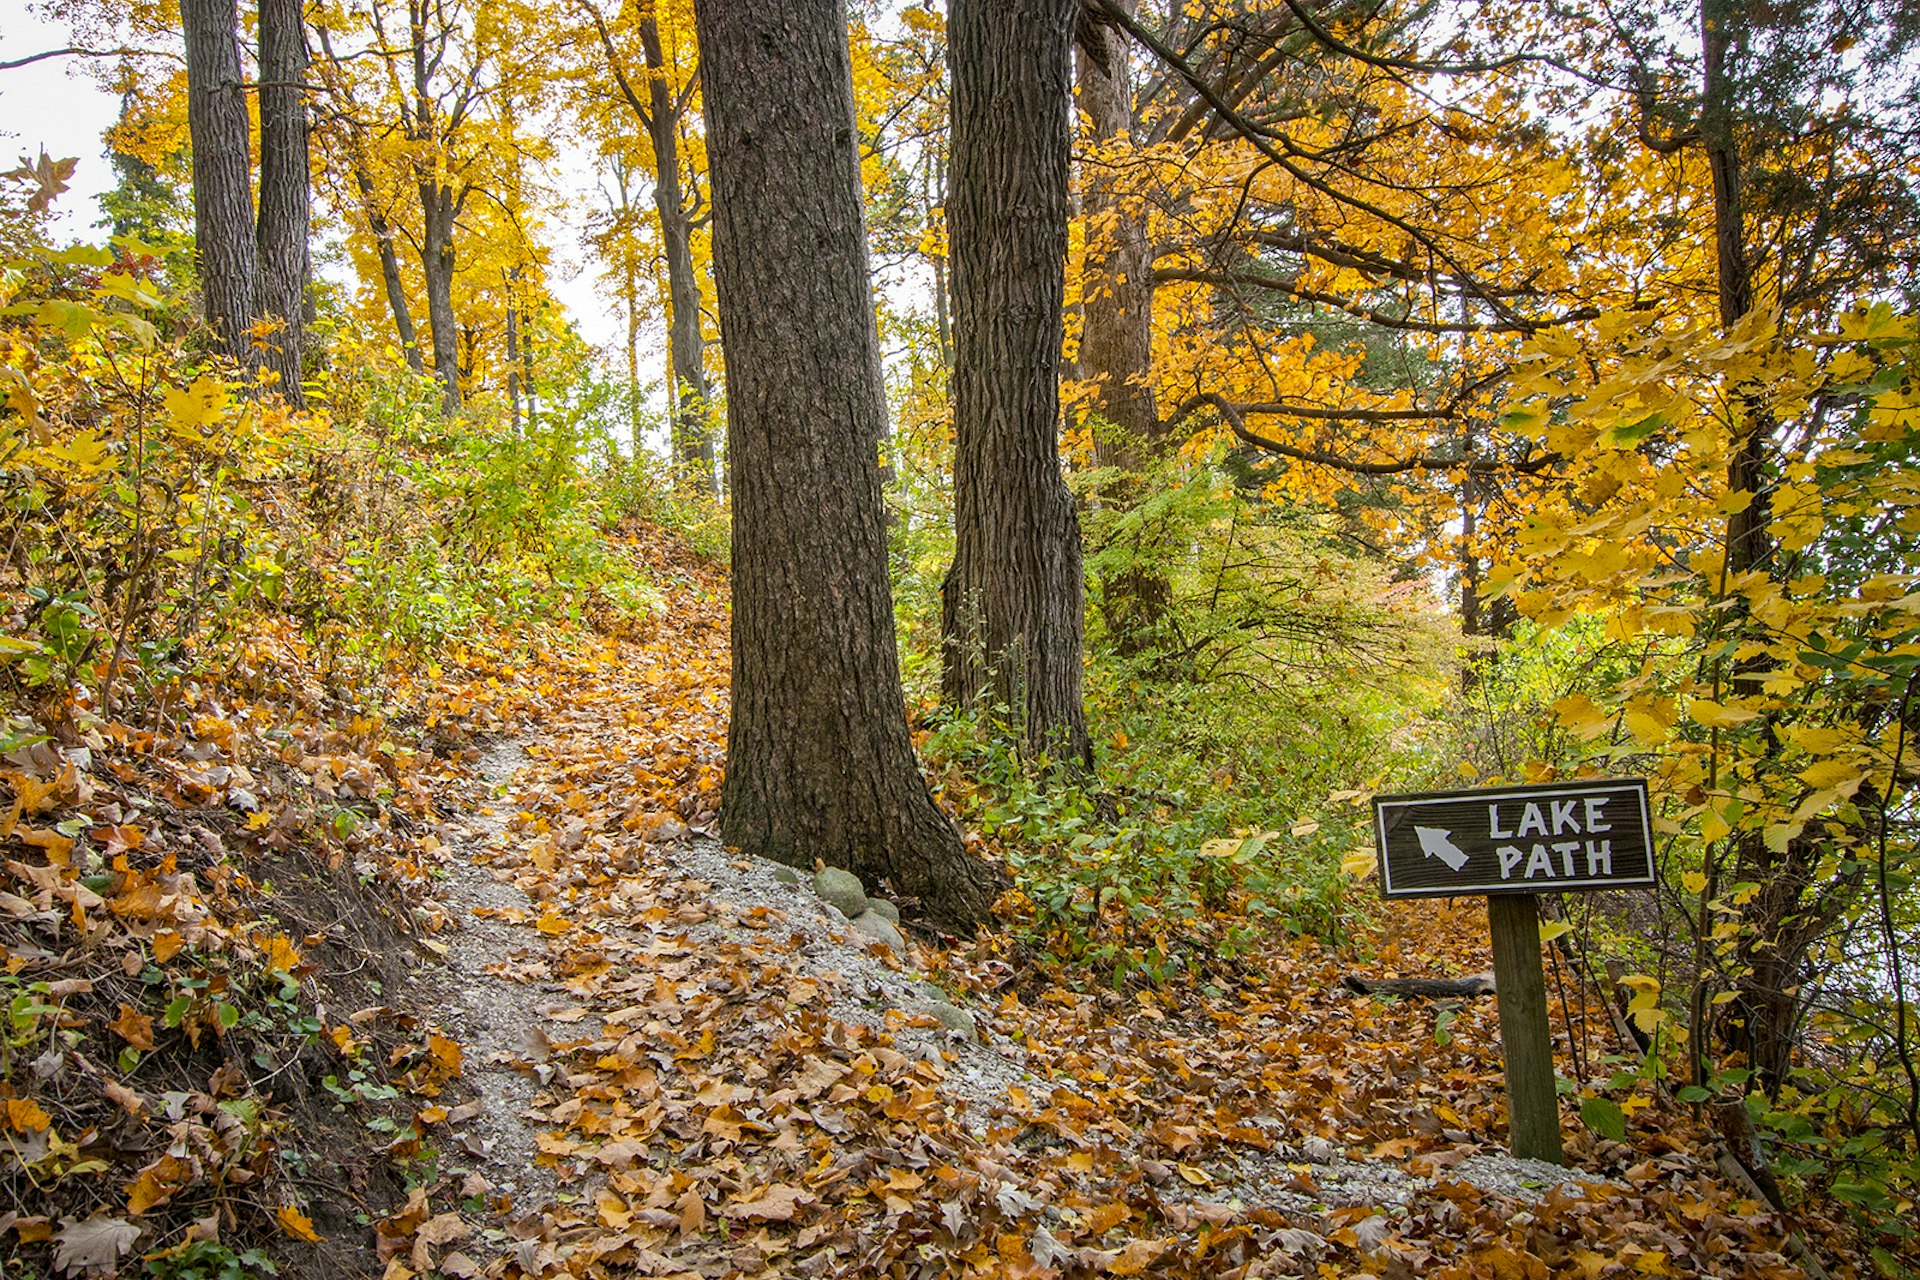 A hiking trail in a forest during autumn, with a sign reading 'Lake Path' on the right in Lake Geneva, Wisconsin